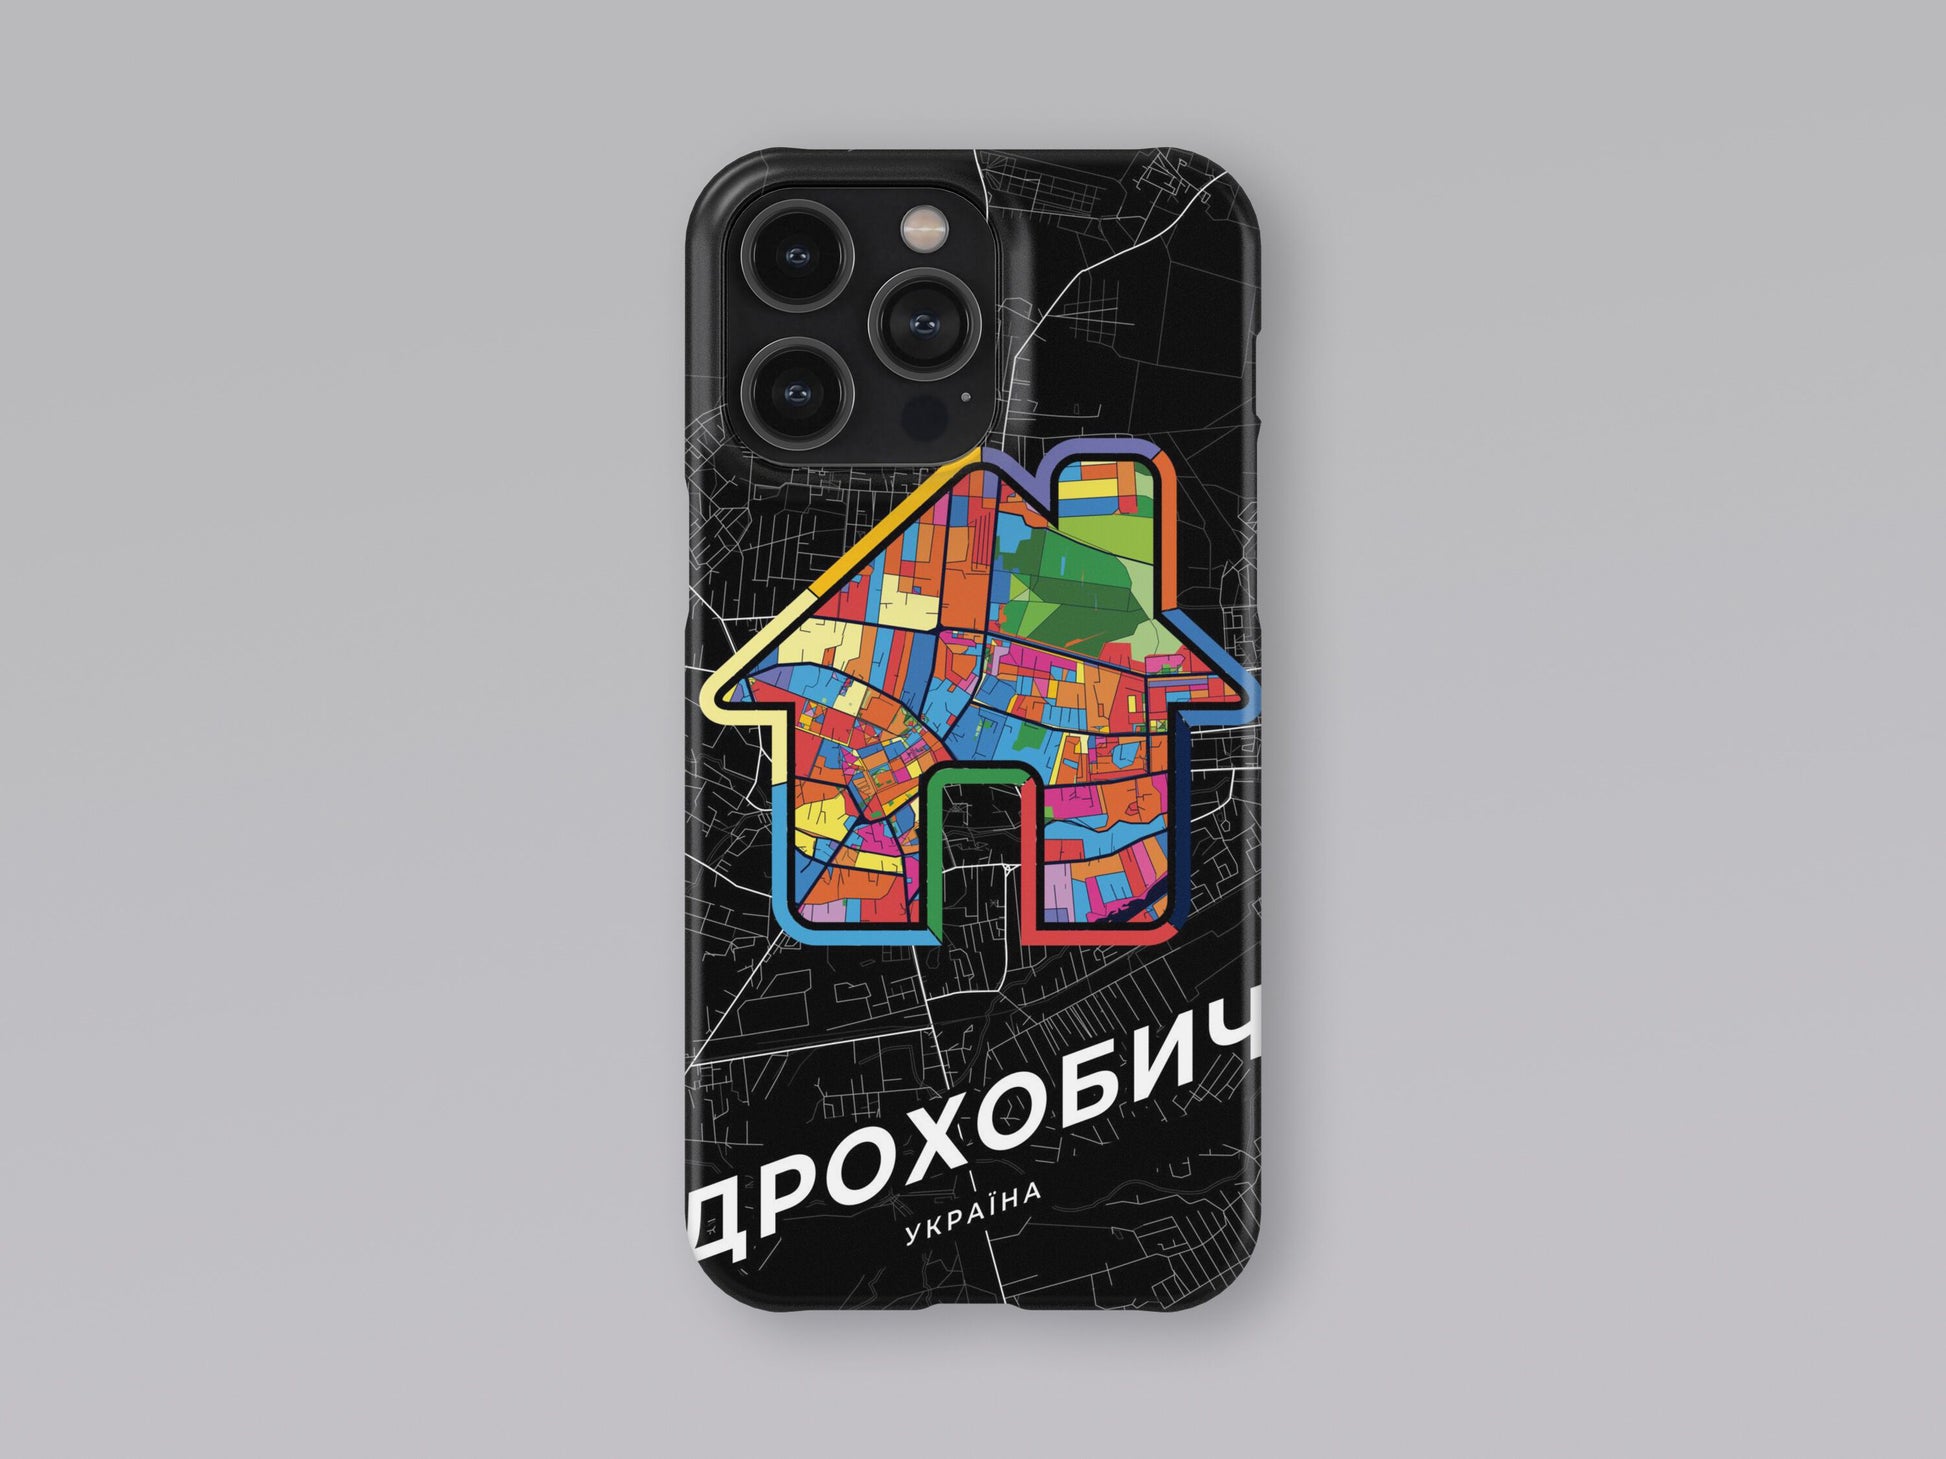 Drohobych Ukraine slim phone case with colorful icon. Birthday, wedding or housewarming gift. Couple match cases. 3